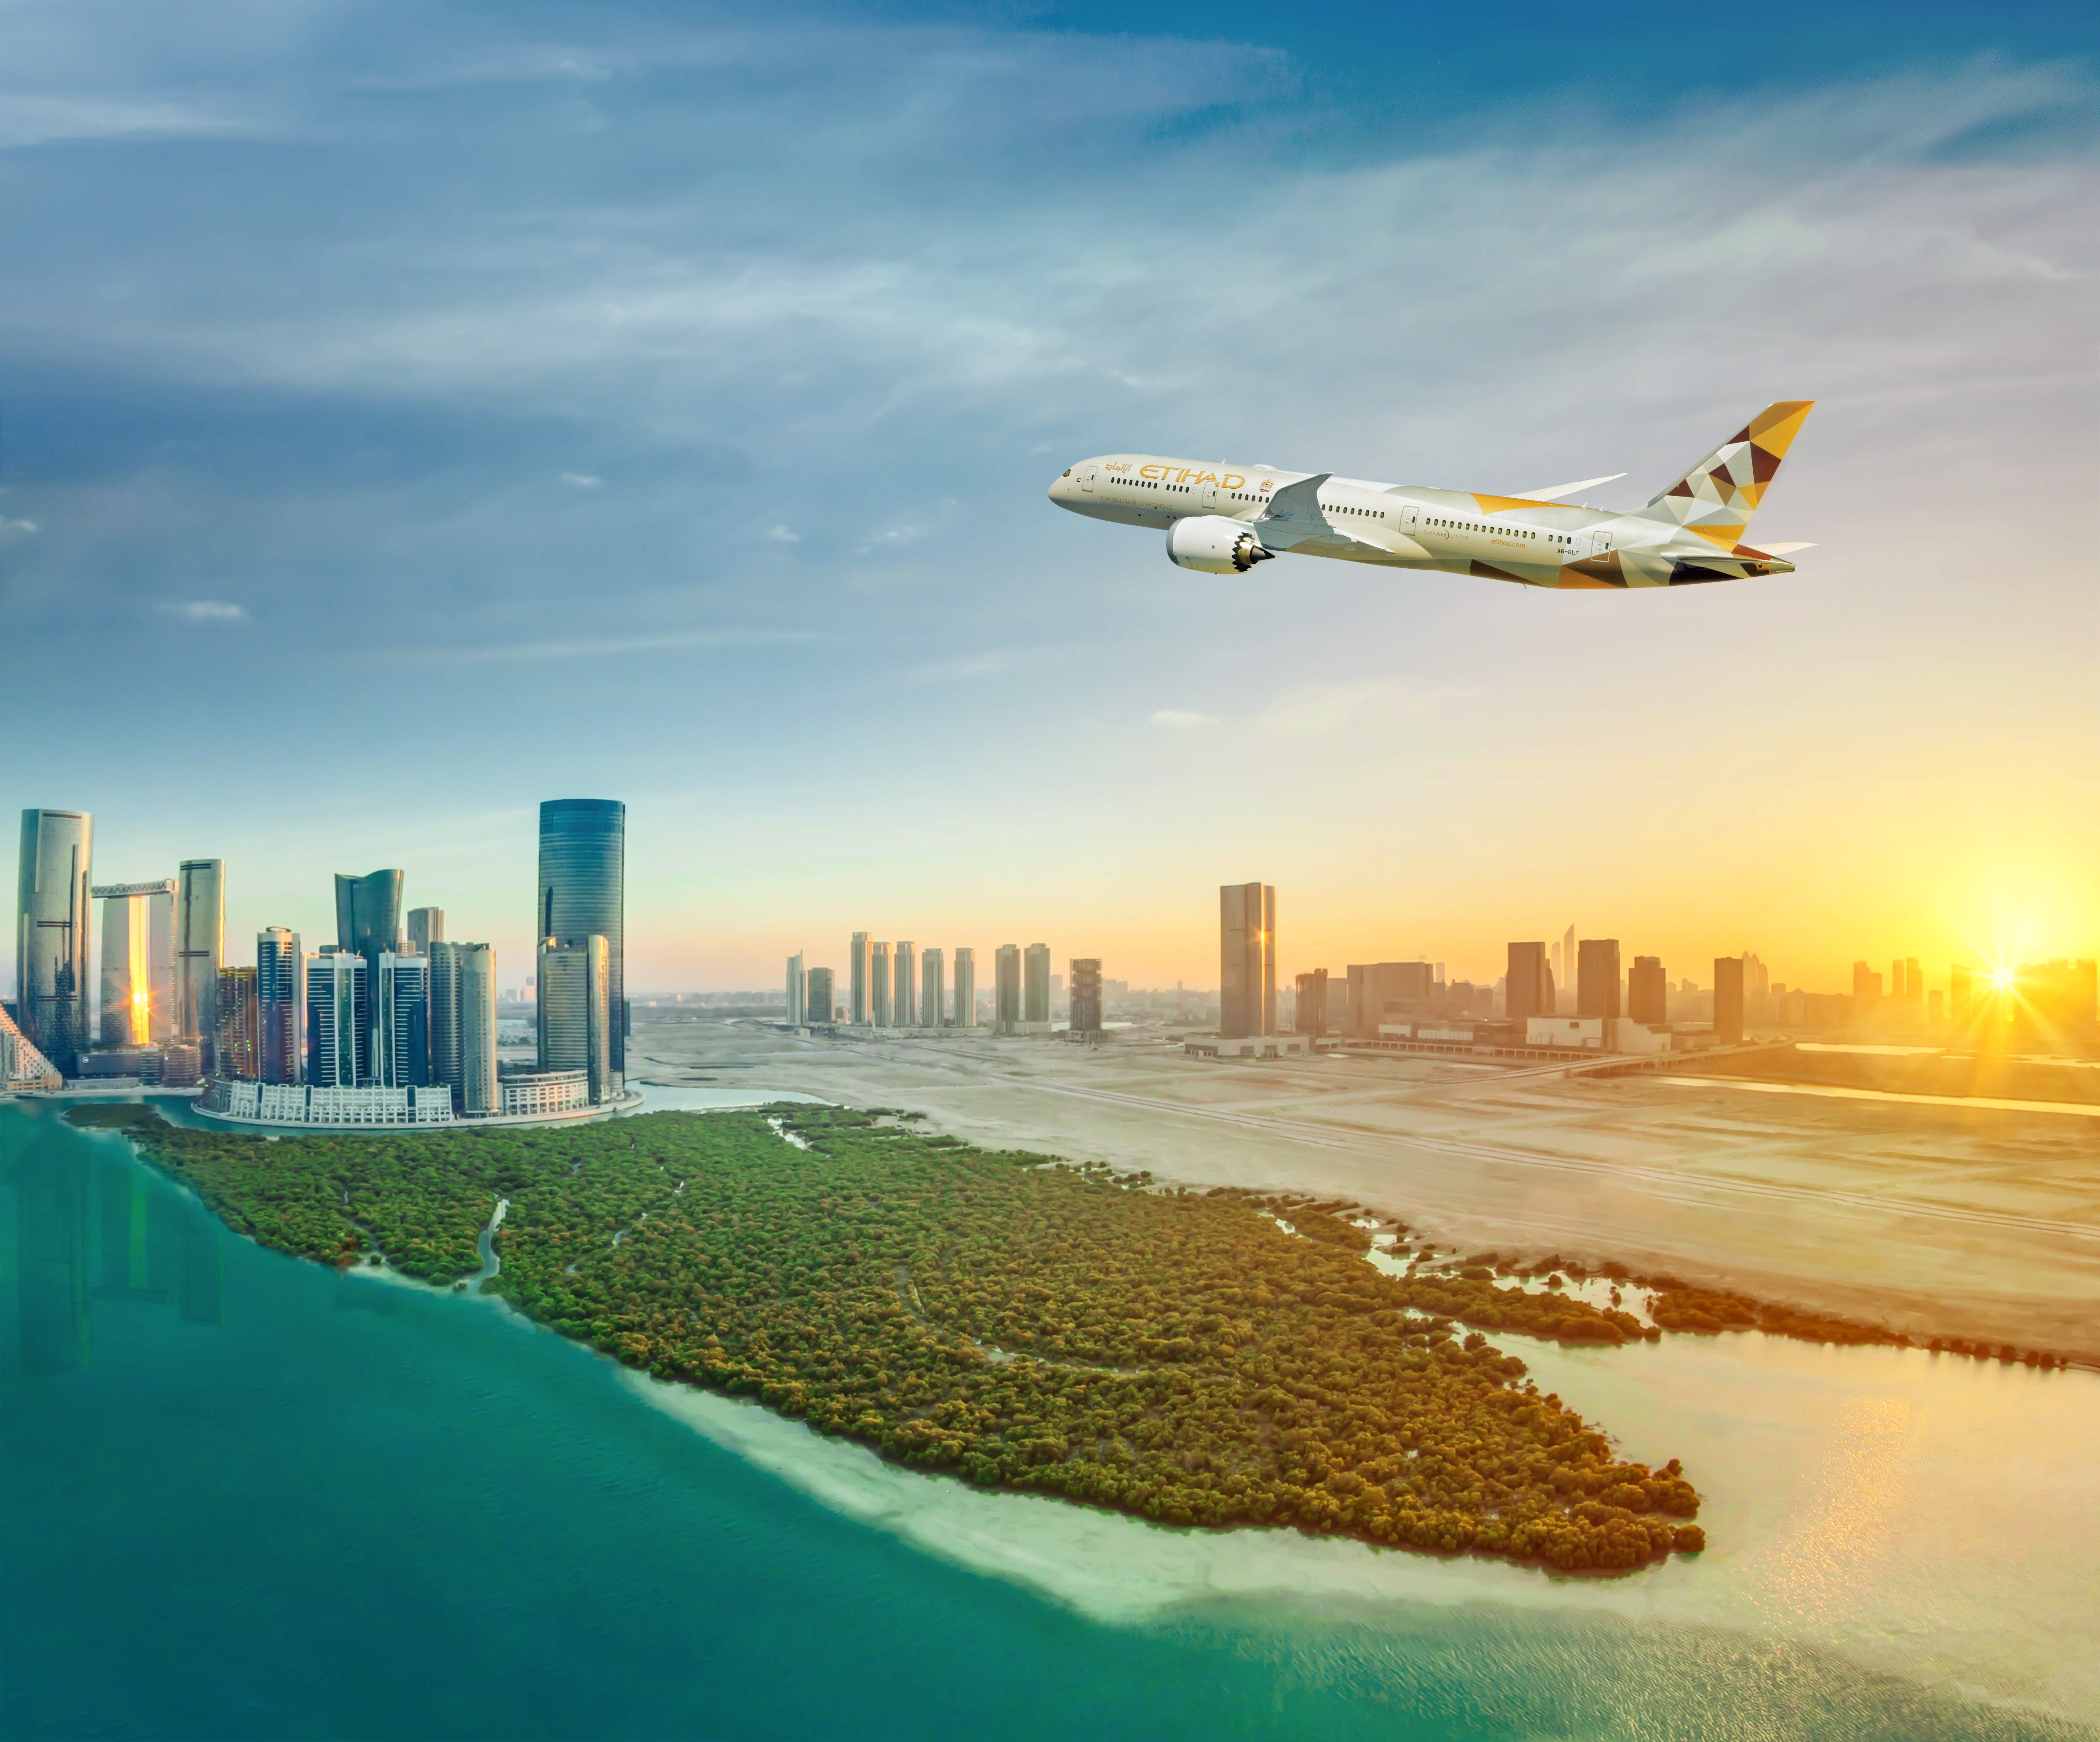 Etihad Airways reports record profit after tax of AED 526 million in first quarter results